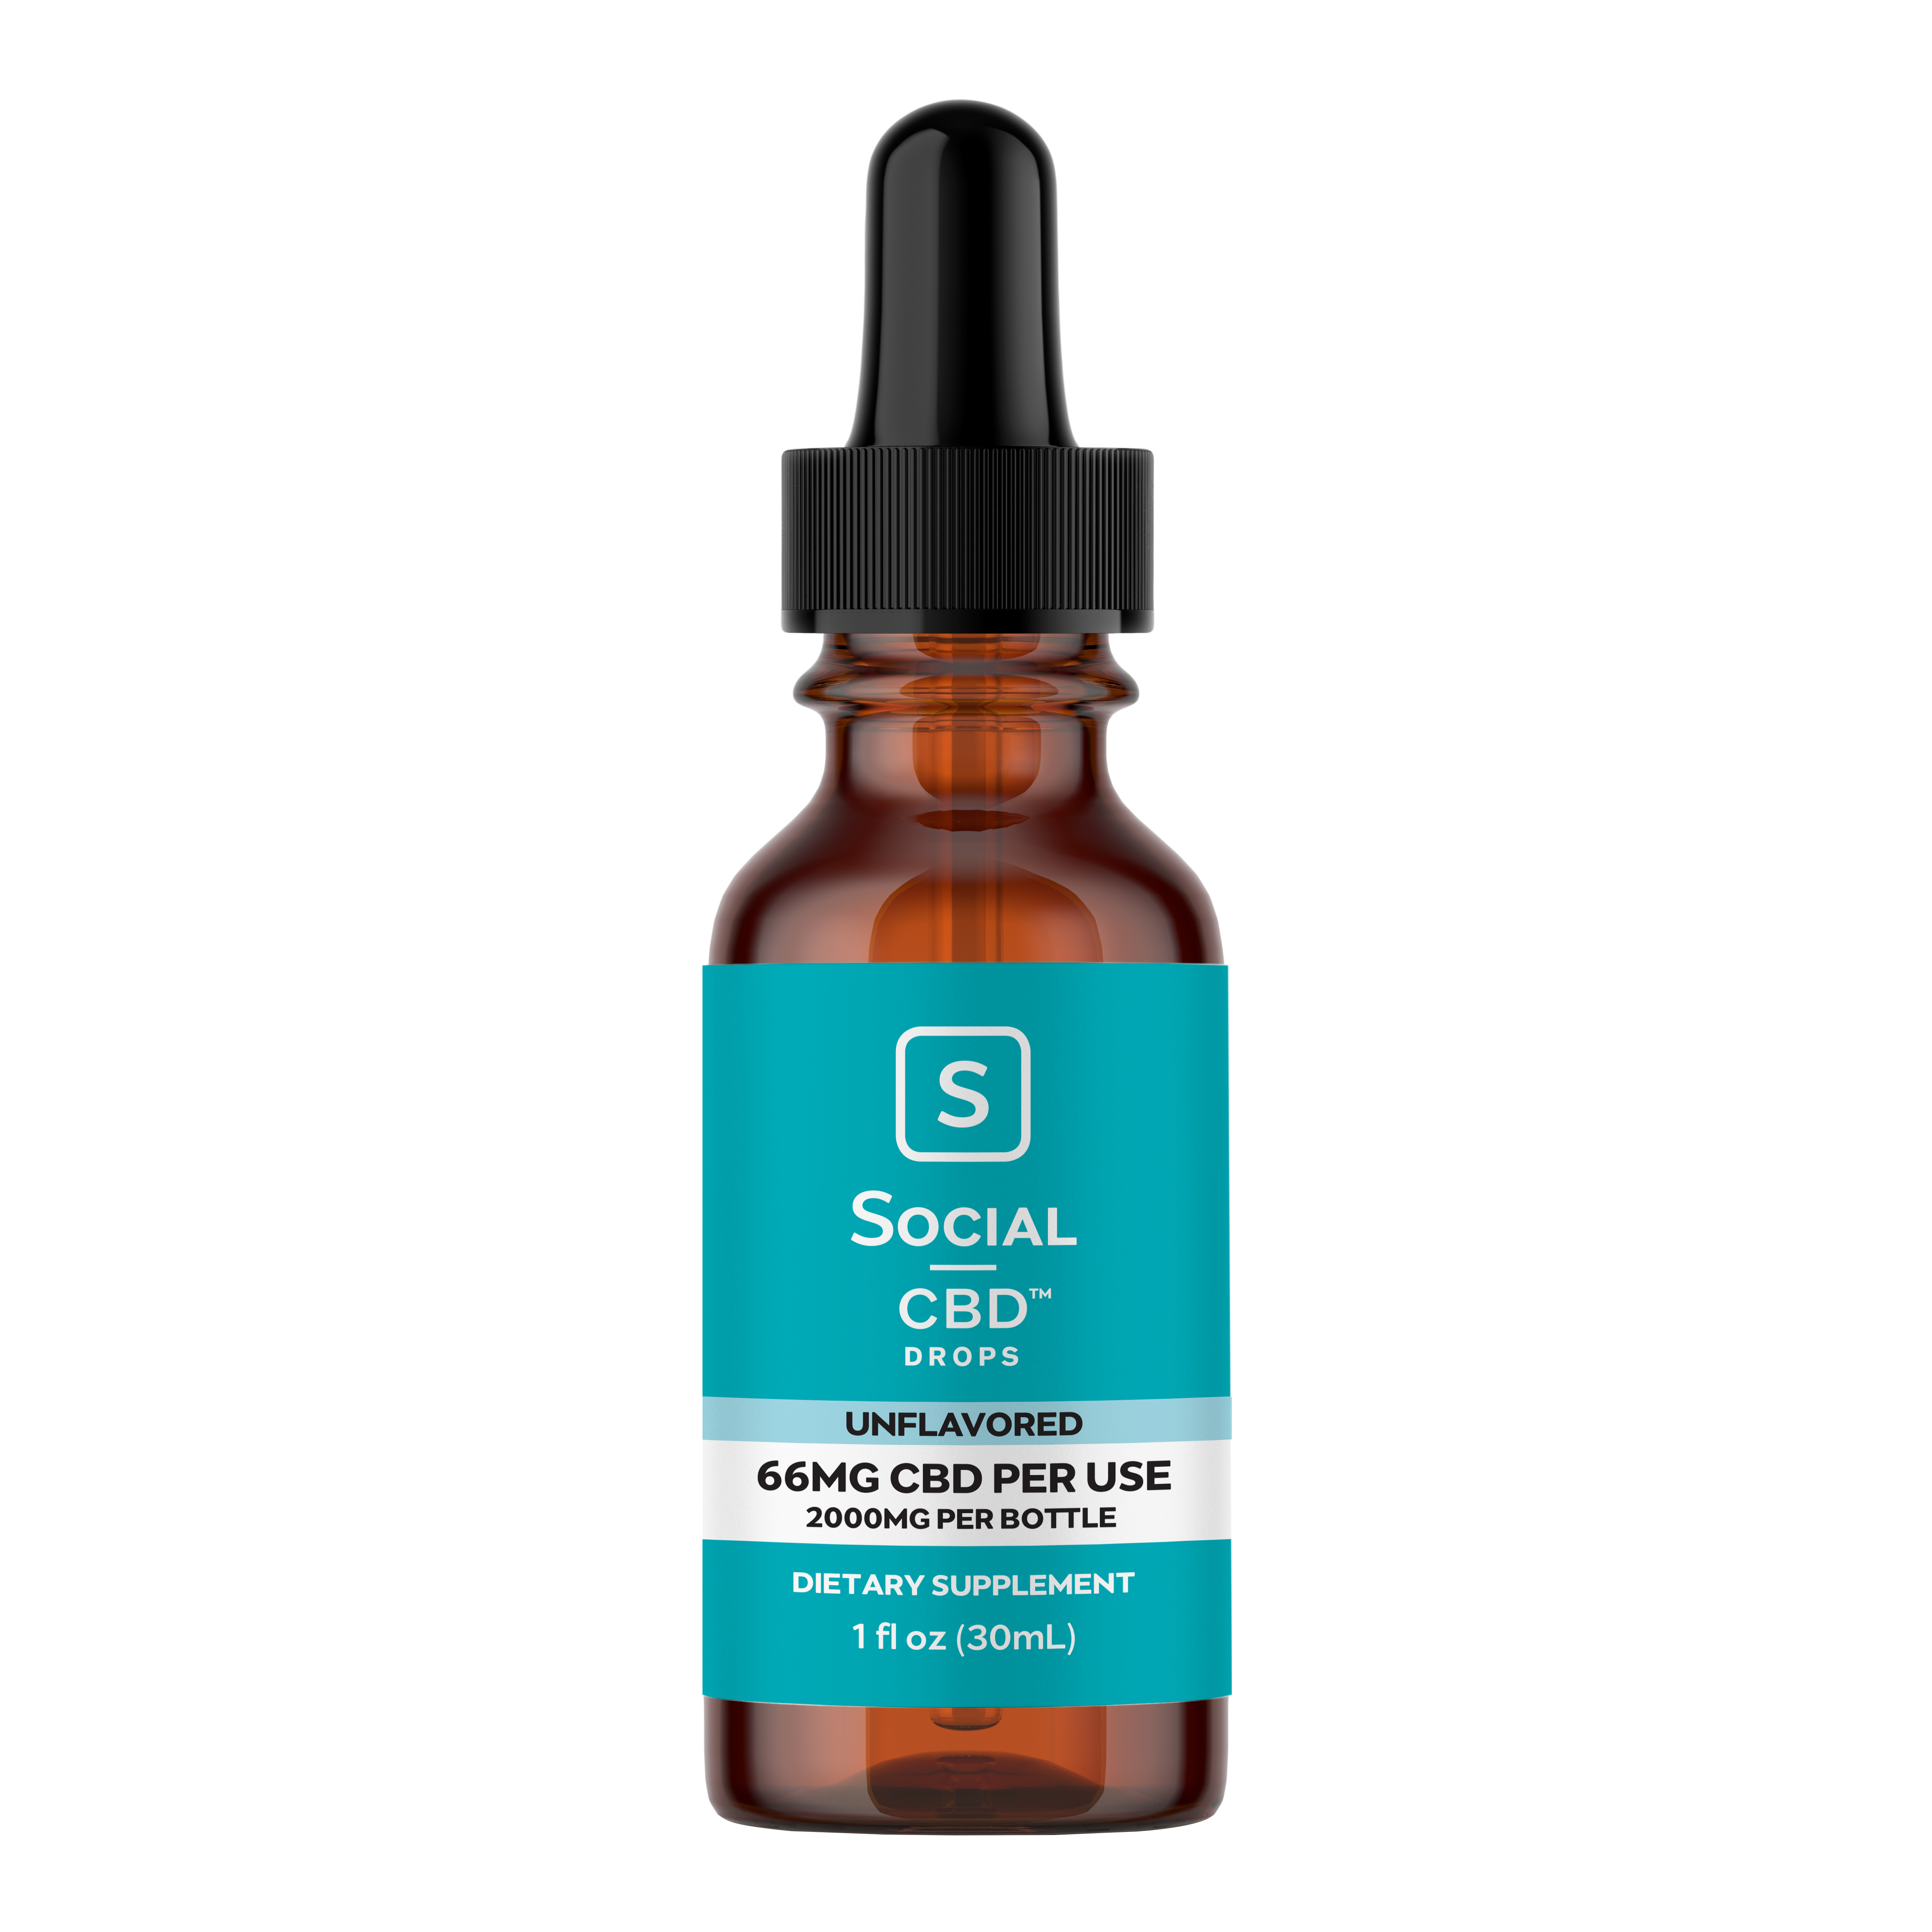 Unflavored Isolate CBD Drops - 2000mg